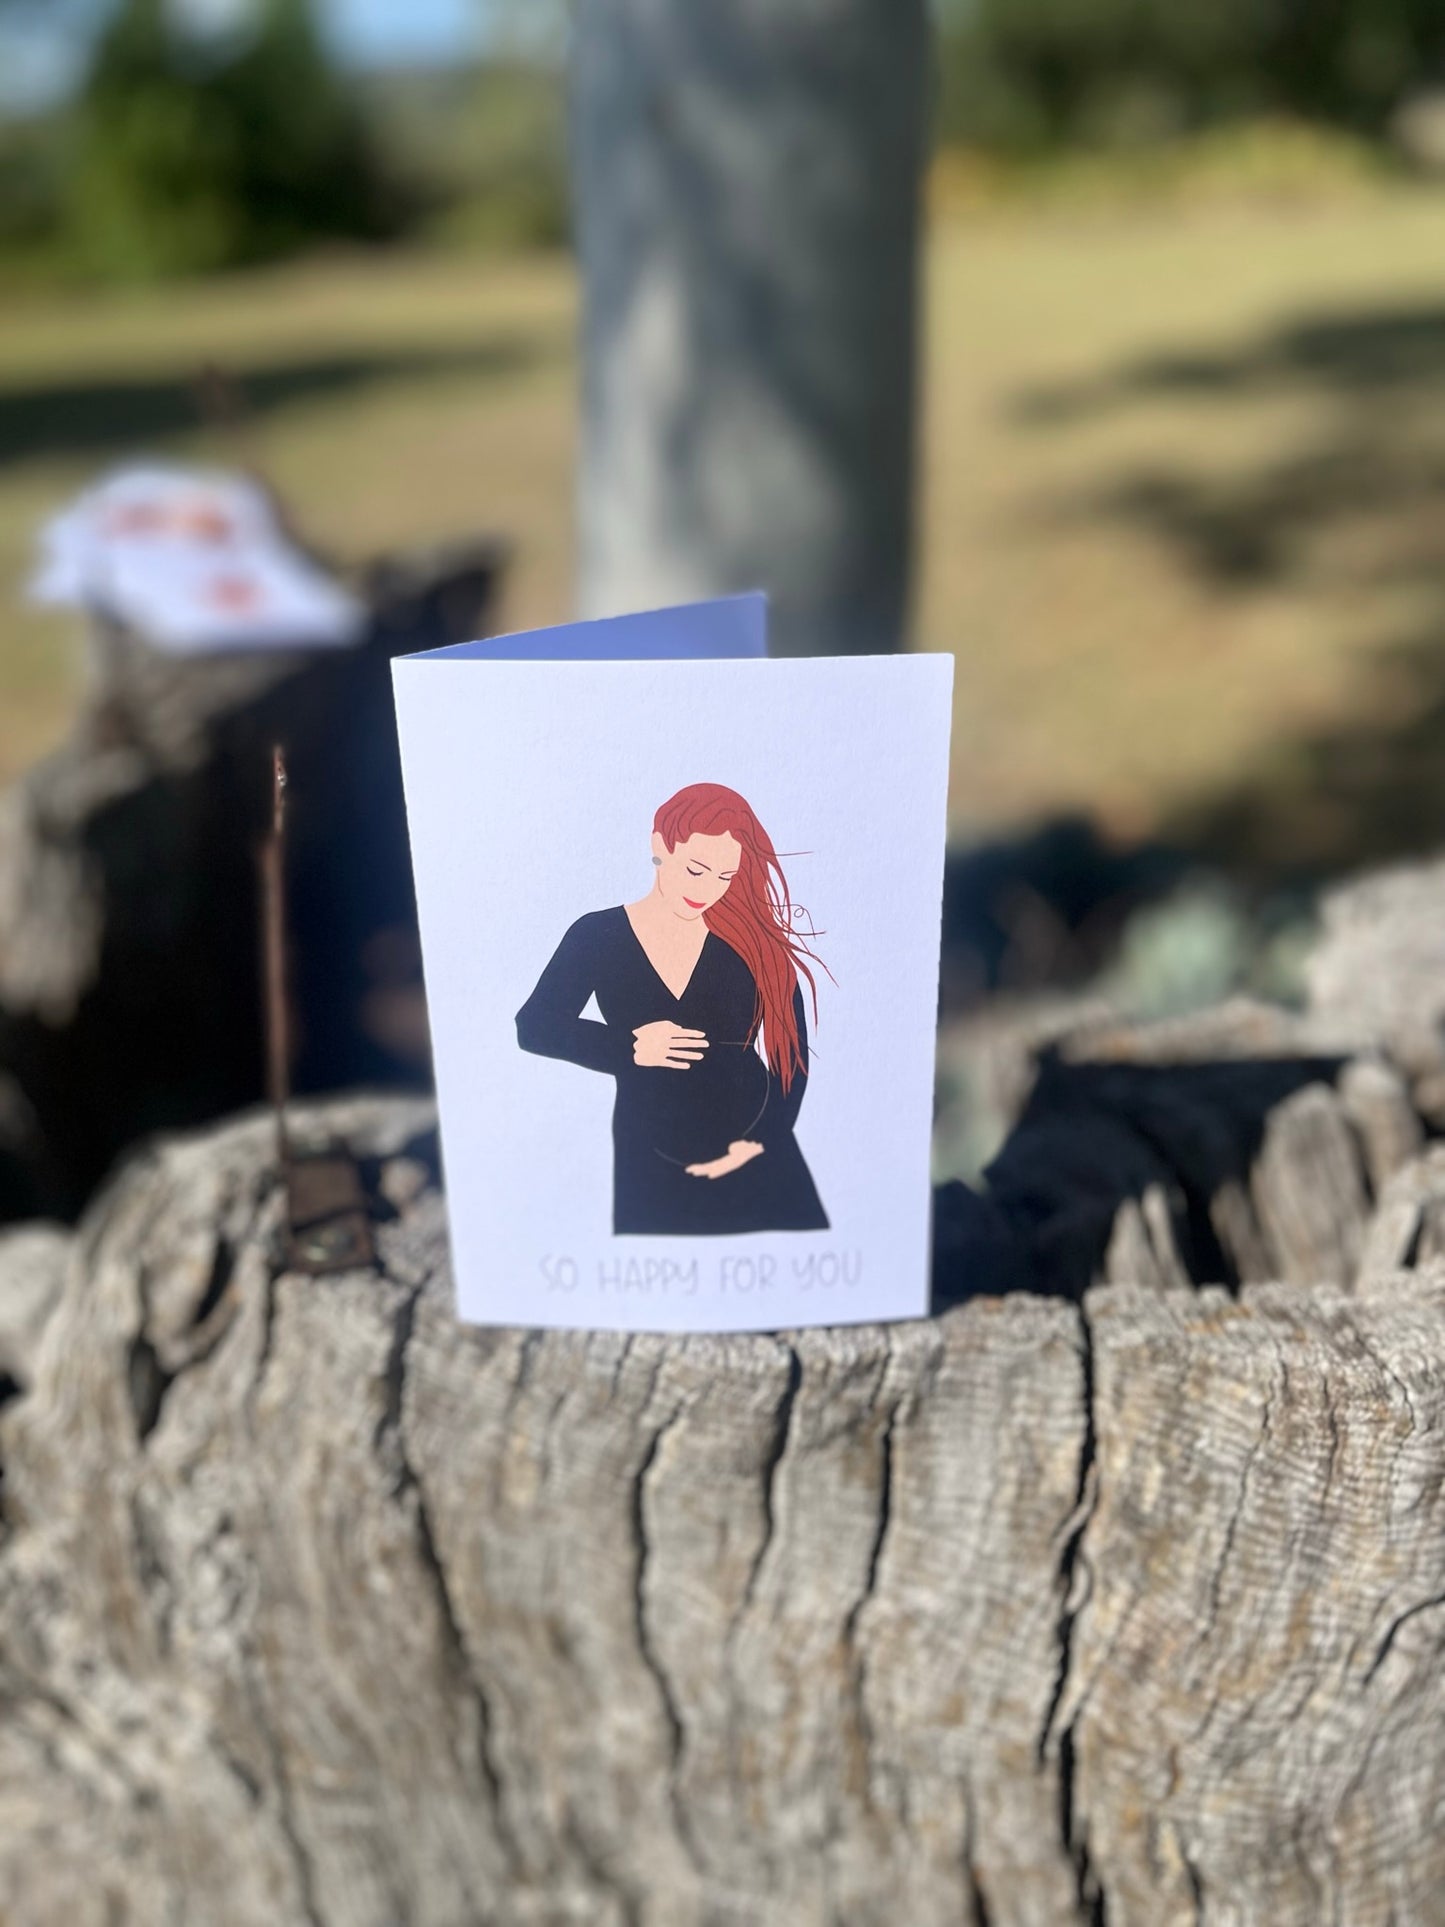 So Happy For You - Pregnancy Card